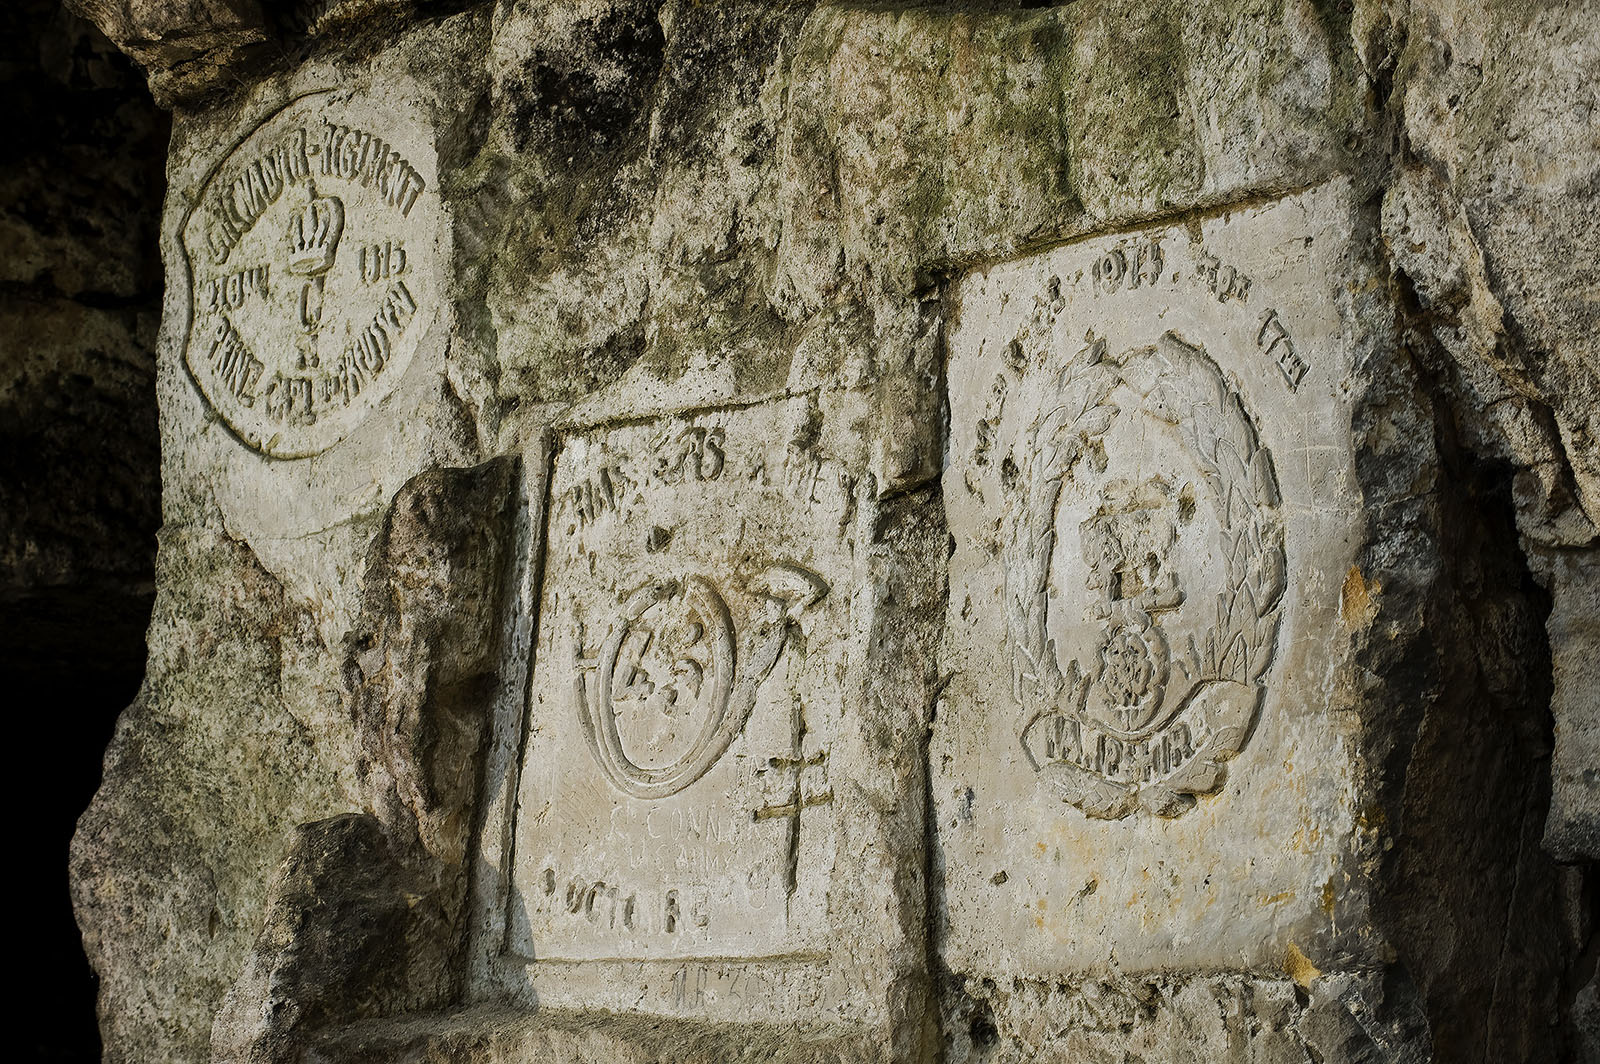 Modern photograph. Blocks of stone embedded in the wall of an underground area, carved with various words and symbols.